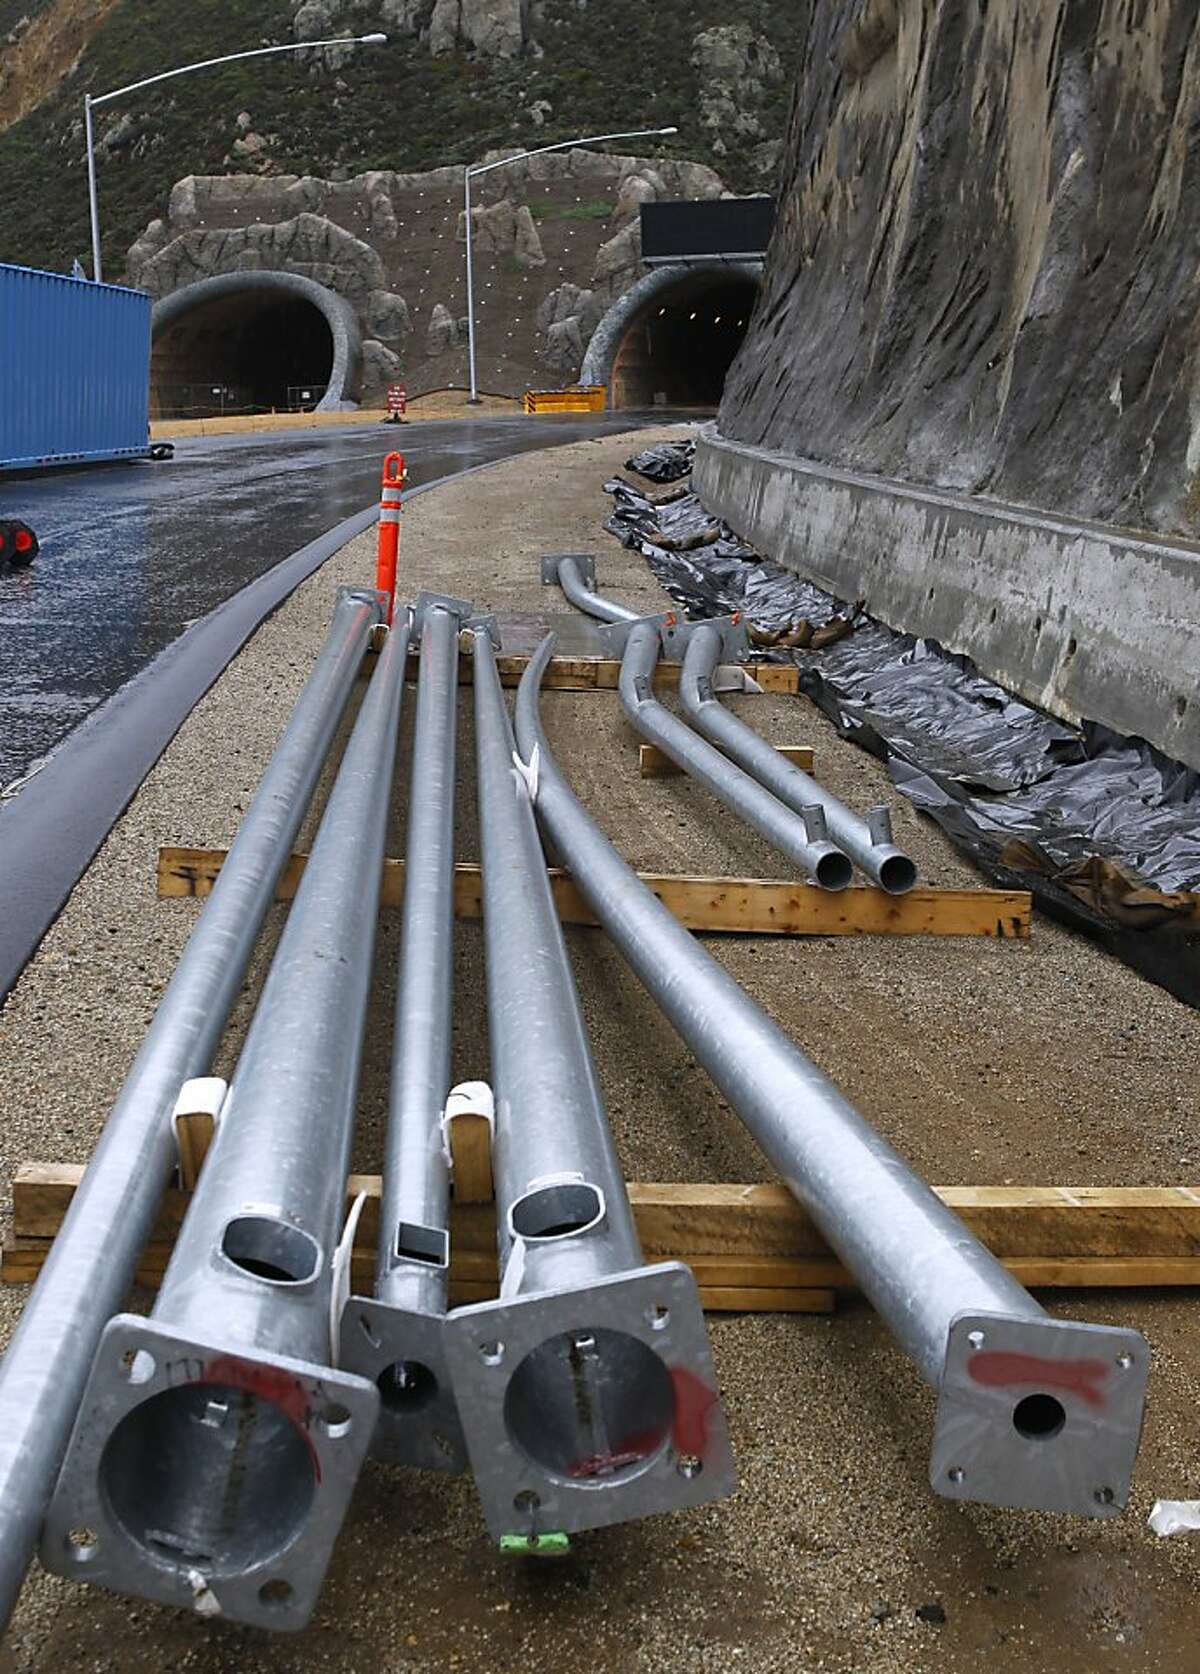 Utility poles wait to be installed on the south end of the Devil's Slide Tunnel project in Pacifica, Calif. on Friday, Dec. 21, 2012. Caltrans plans to open the twin bores early next year.